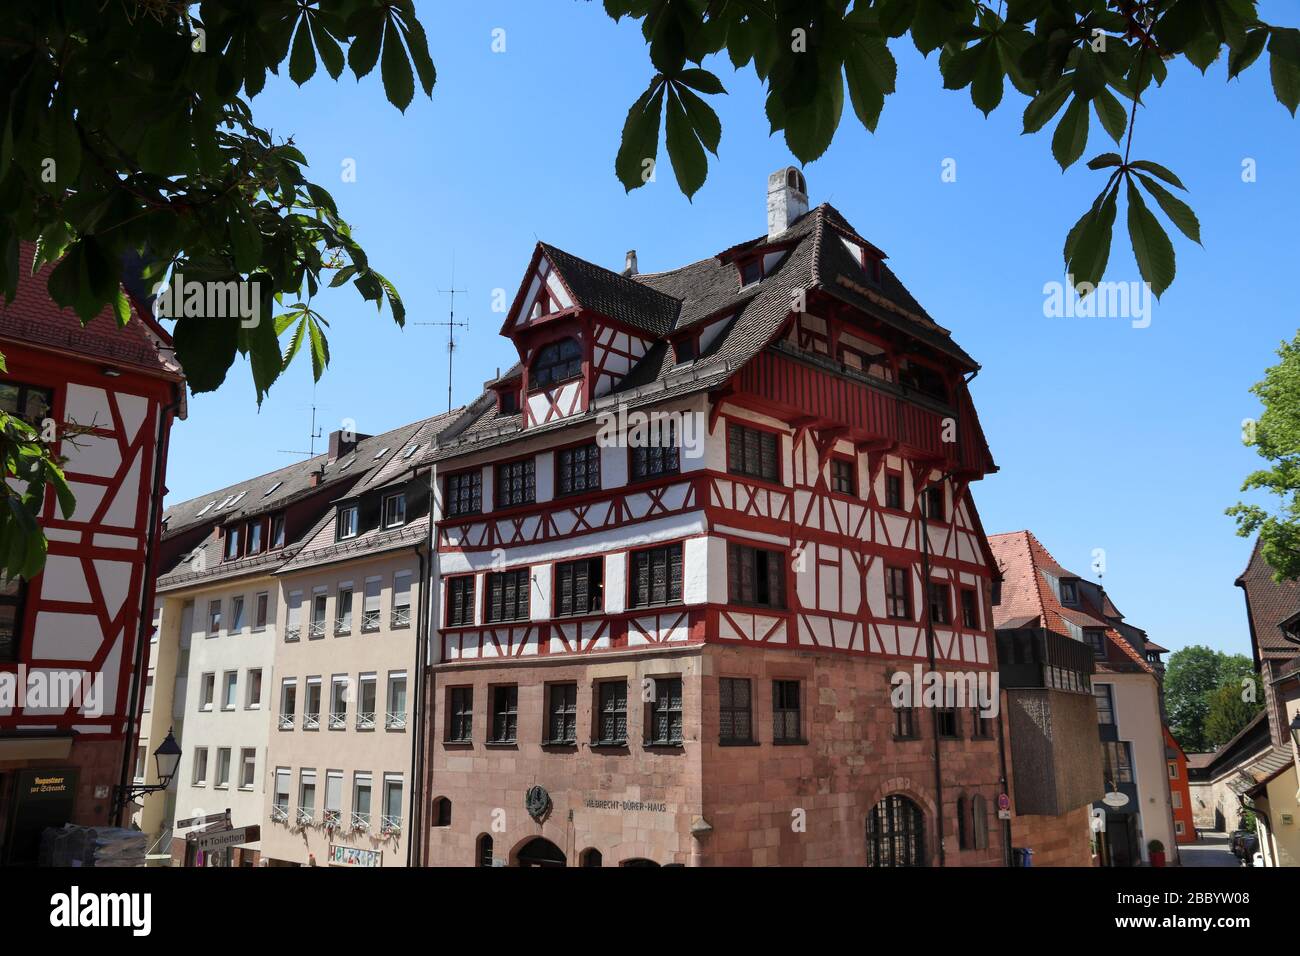 NUREMBERG, GERMANY - MAY 8, 2018: Albrecht Durer house in Nuremberg Old Town, Germany. Albrecht Durer (or Duerer) was a German Renaissance painter. Stock Photo